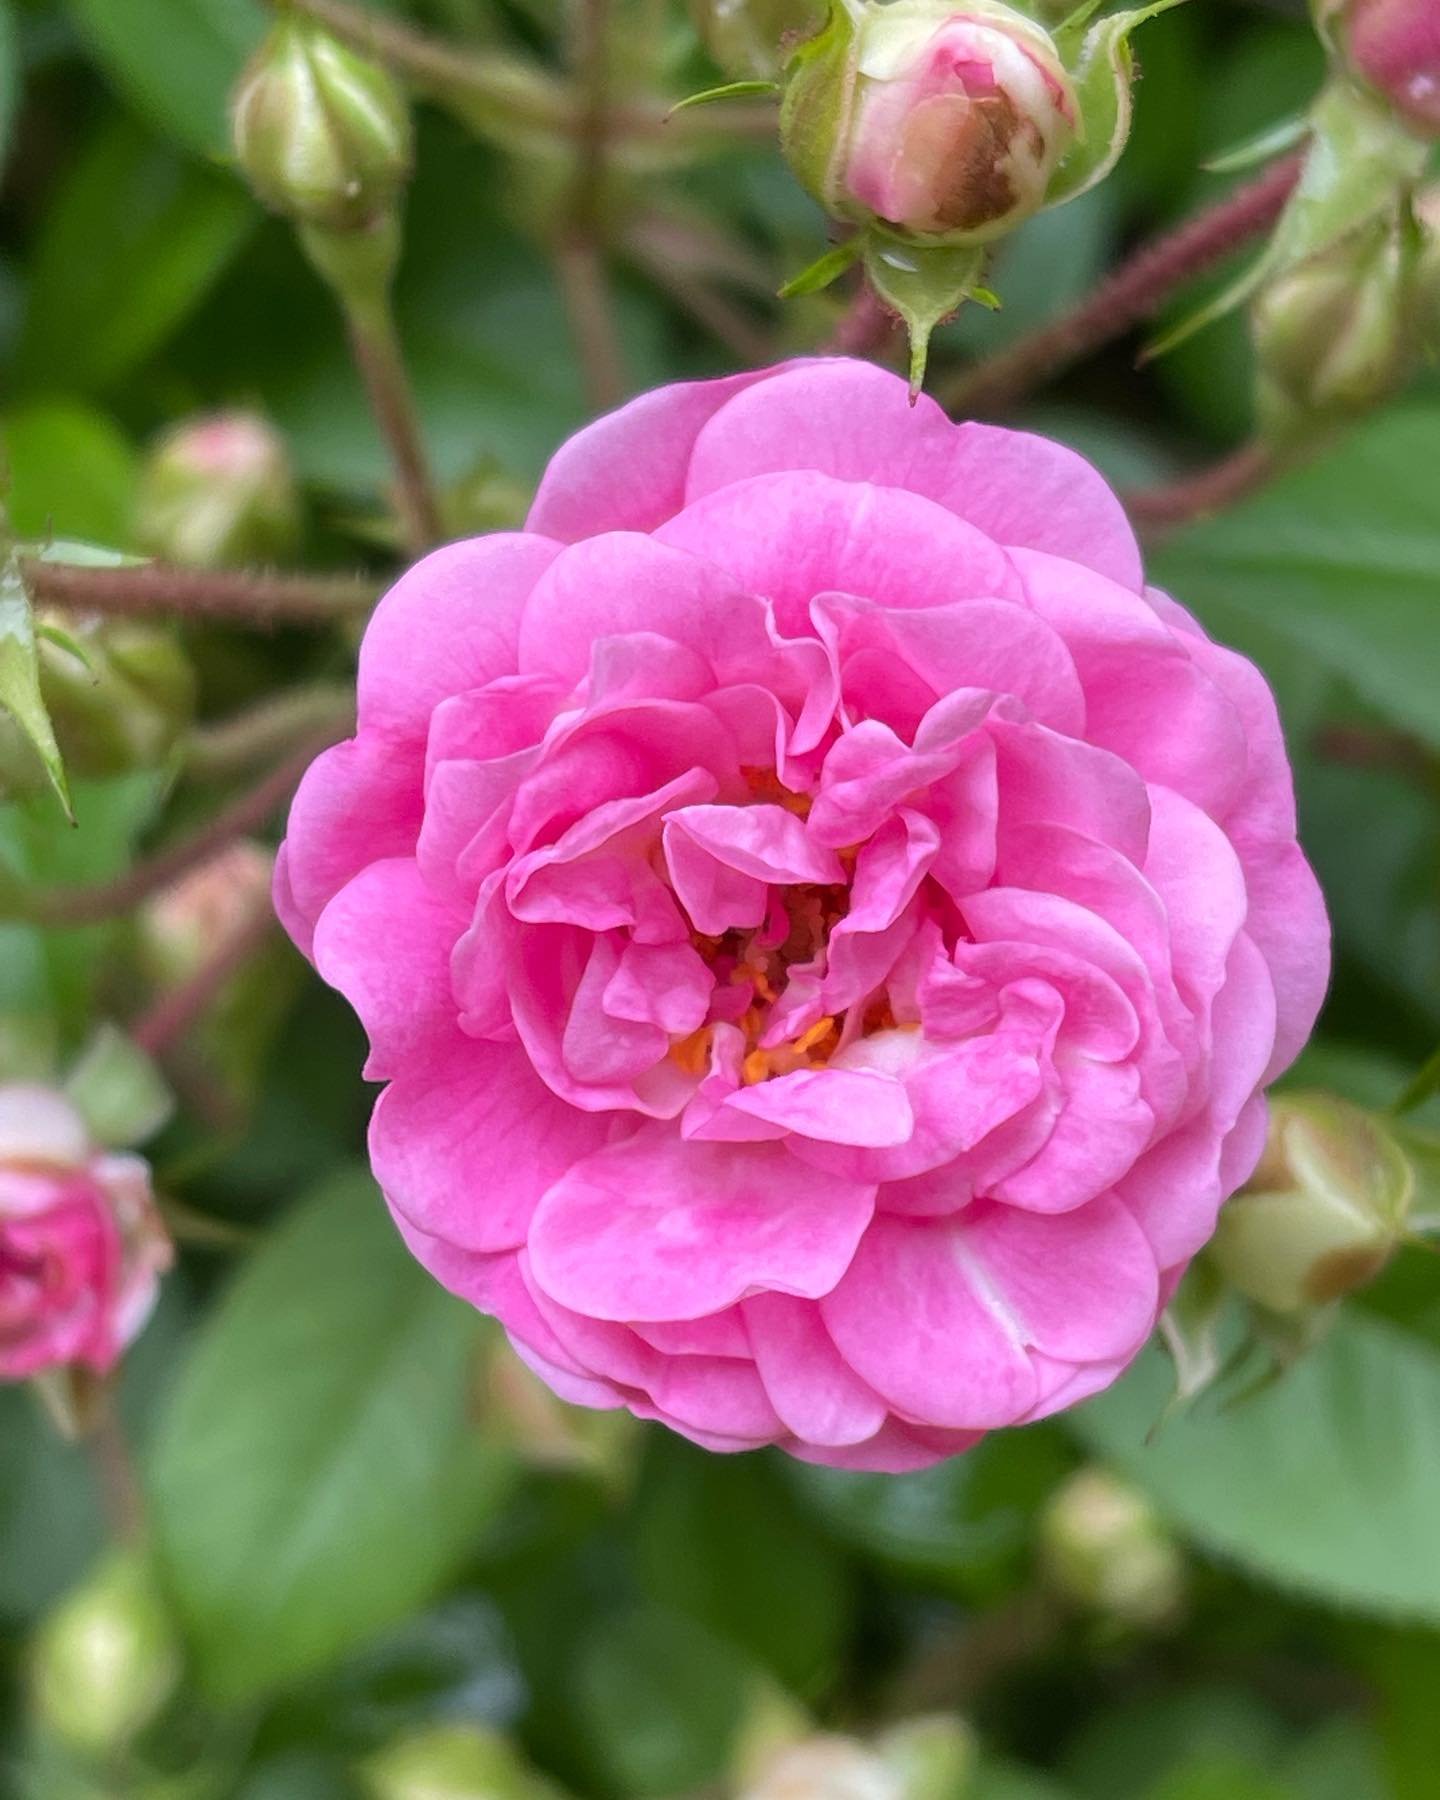 A spring favorite&hellip;

Peggy Martin Climbing Rose 🌹 

Beautiful and reliable! This rose got its name from an avid Louisiana gardener whose home and property stood under 20 feet of salt water for two weeks after Hurricane Katrina in 2005. This be